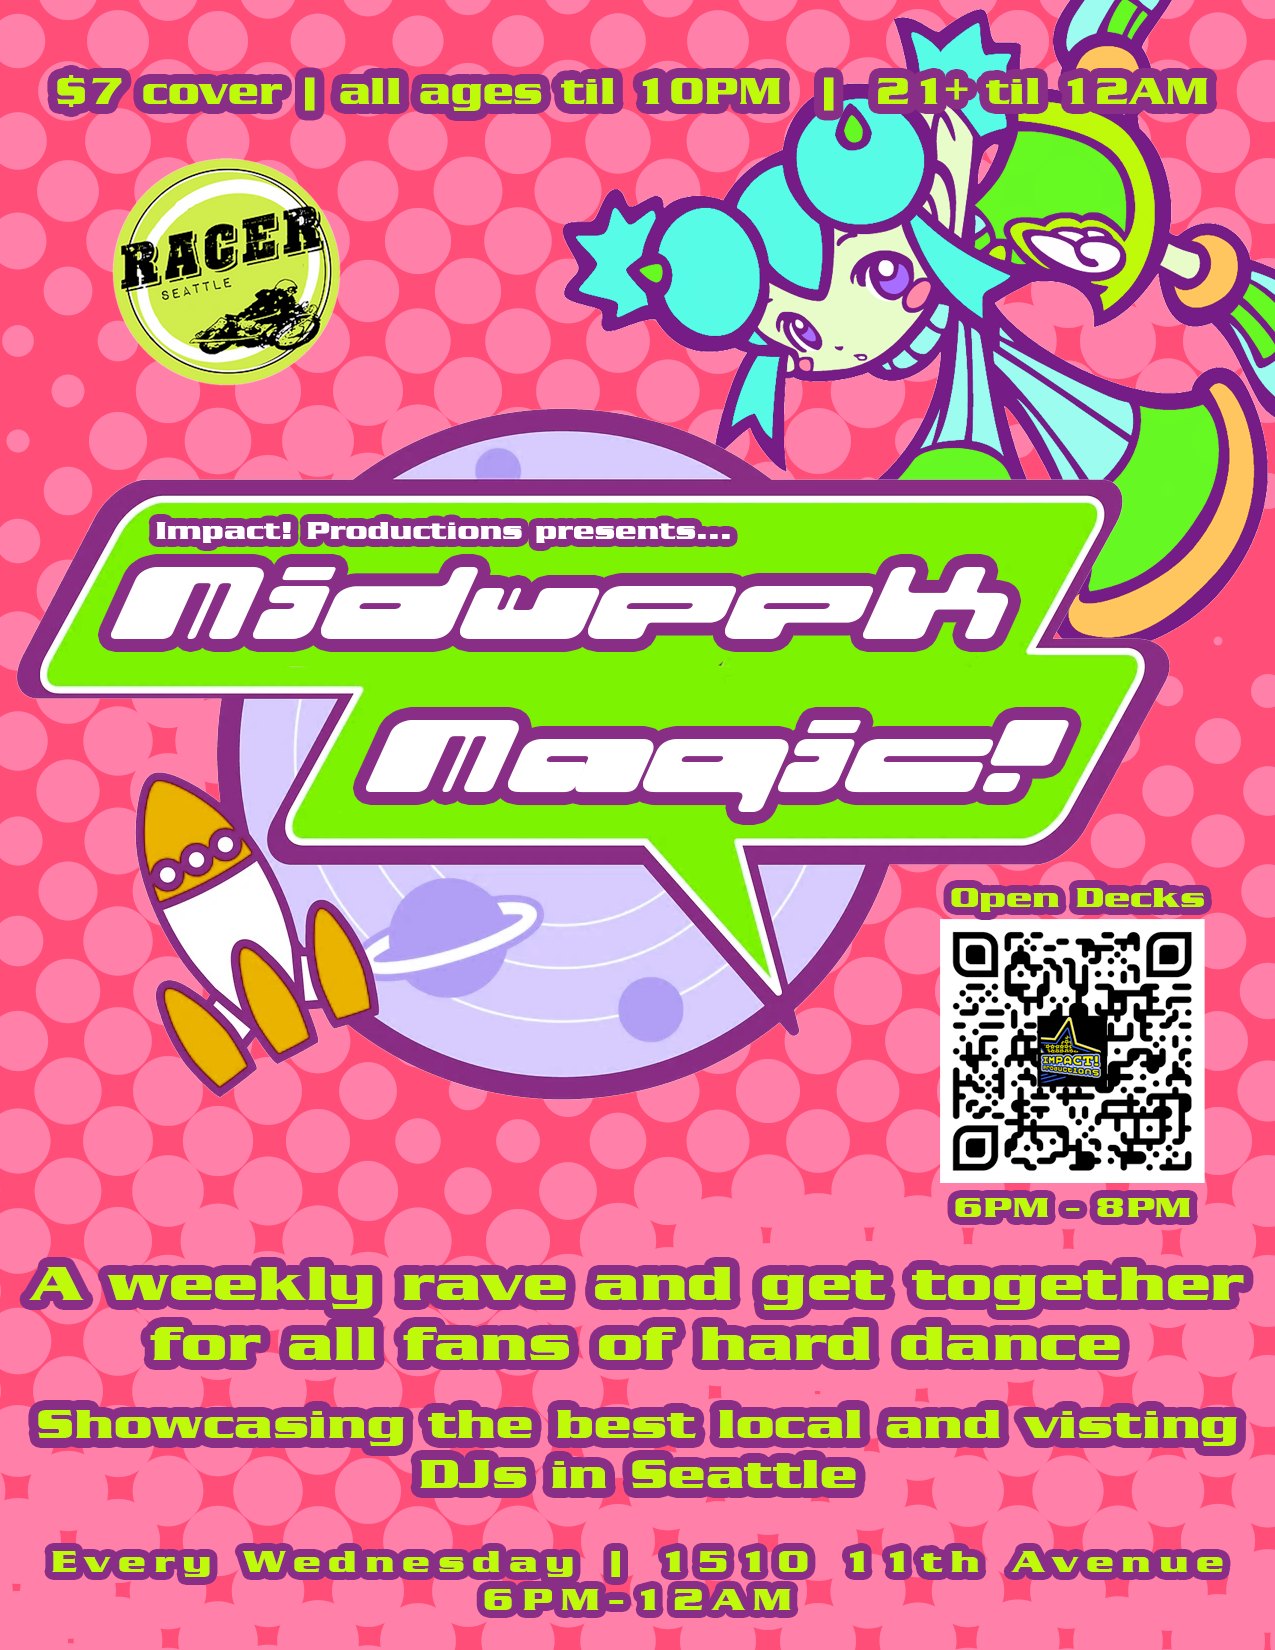 MIDWEEK MAGIC 5-3-23 AT CAFE RACER BY IMPACT! PRODUCTIONS SEATTLE POSTER FLYER